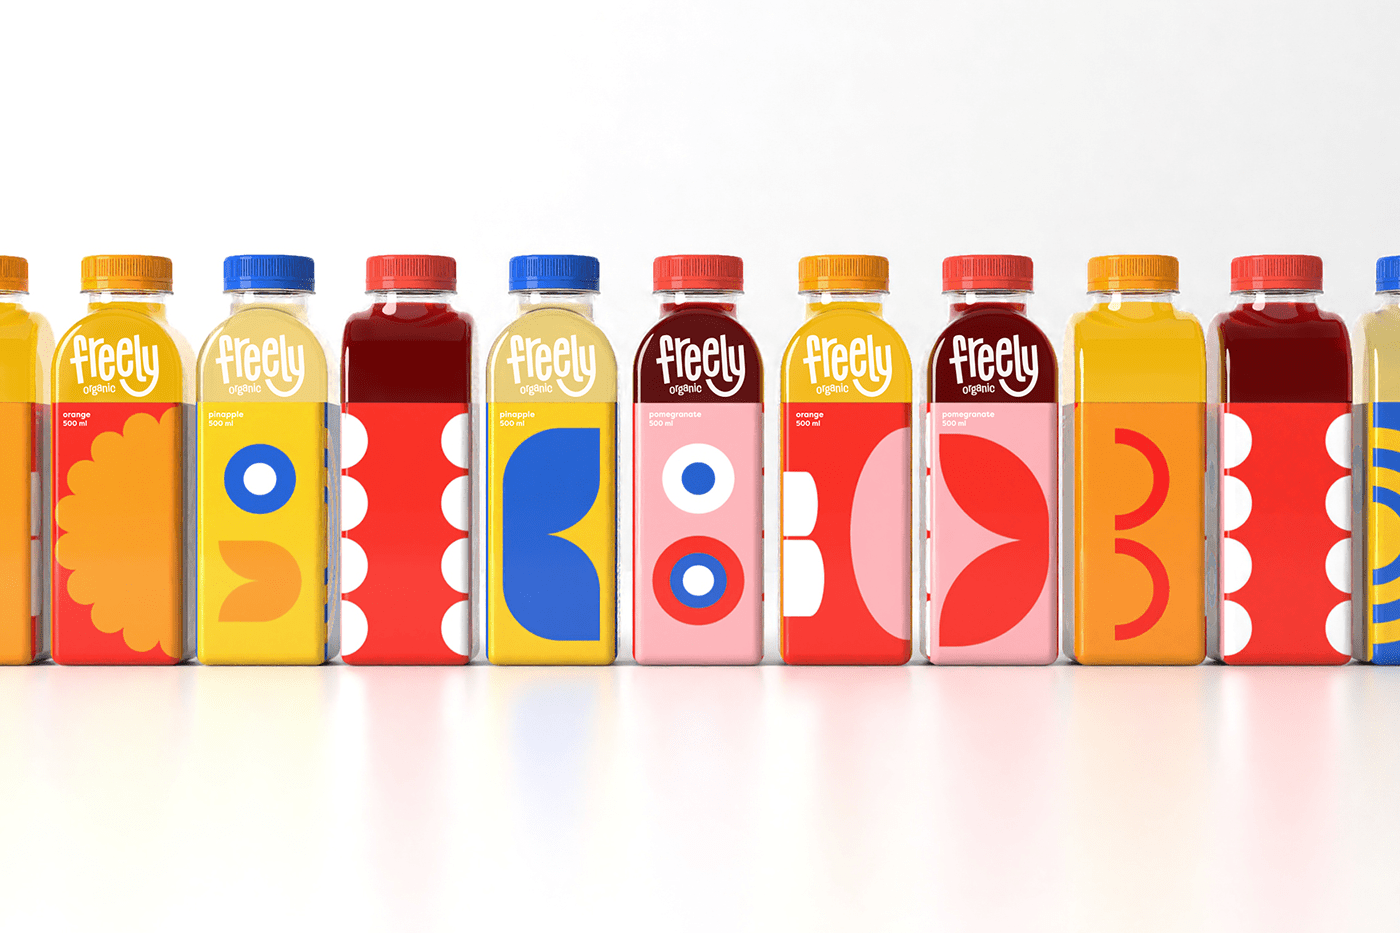 Pack of the Month: Student Project Freely Is Equal Parts Juice